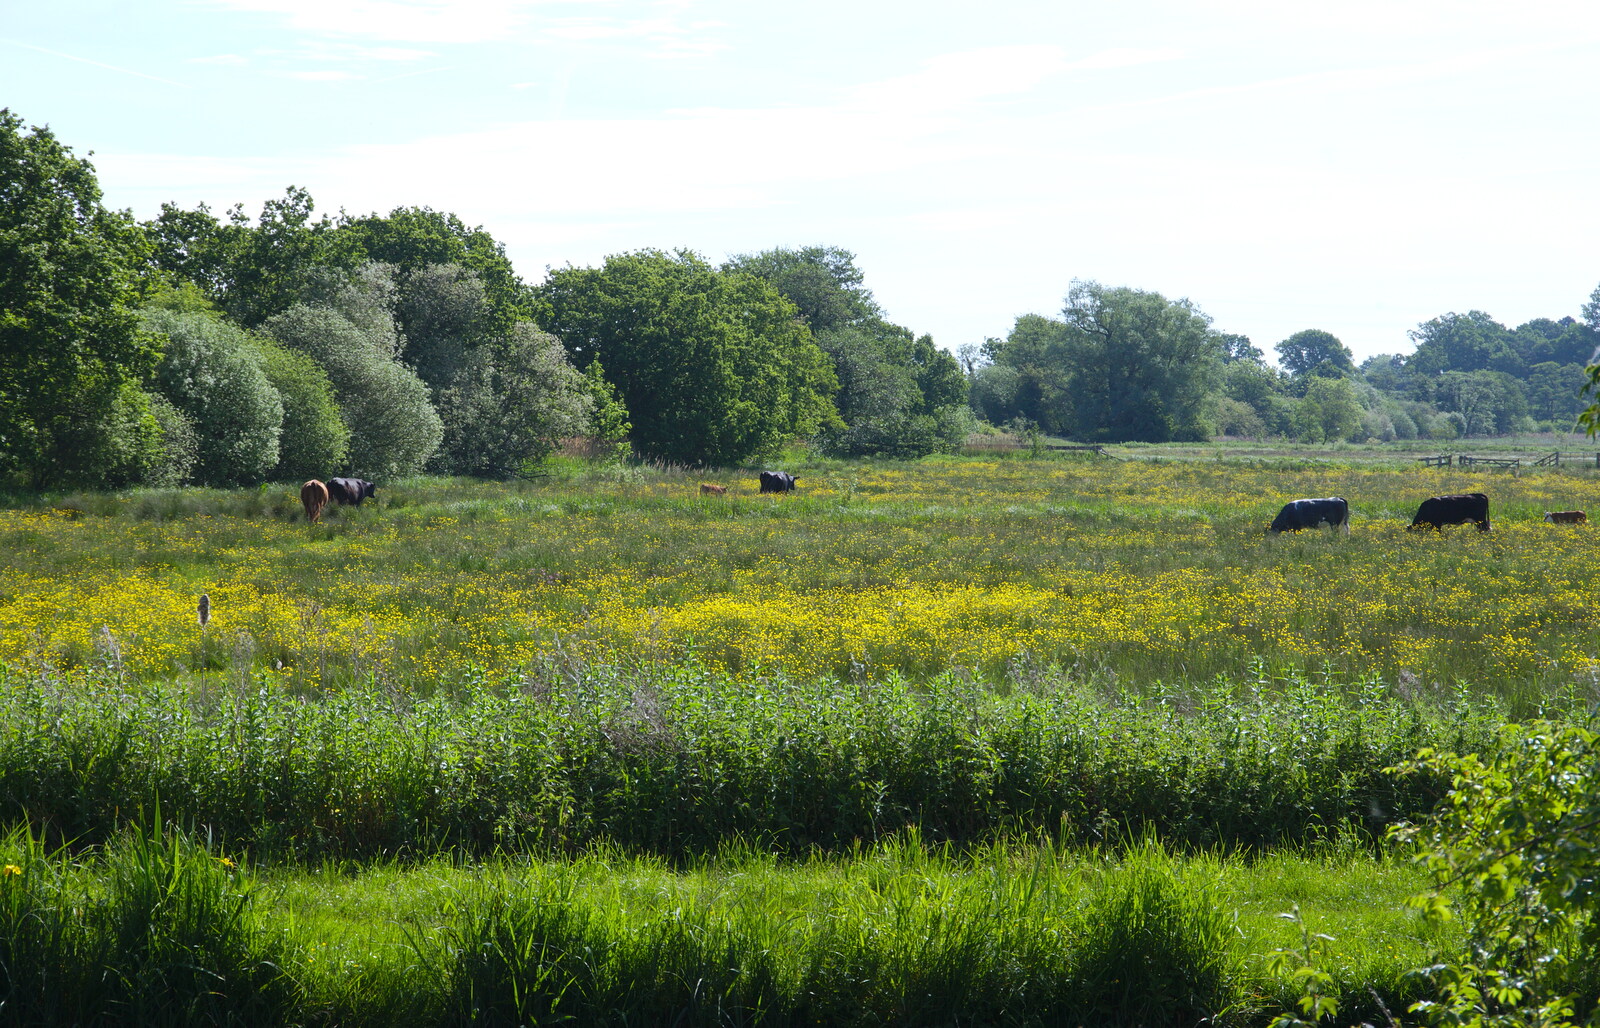 The watermeadows and cows look like an oil painting from Camping at Three Rivers, Geldeston, Norfolk - 1st June 2019